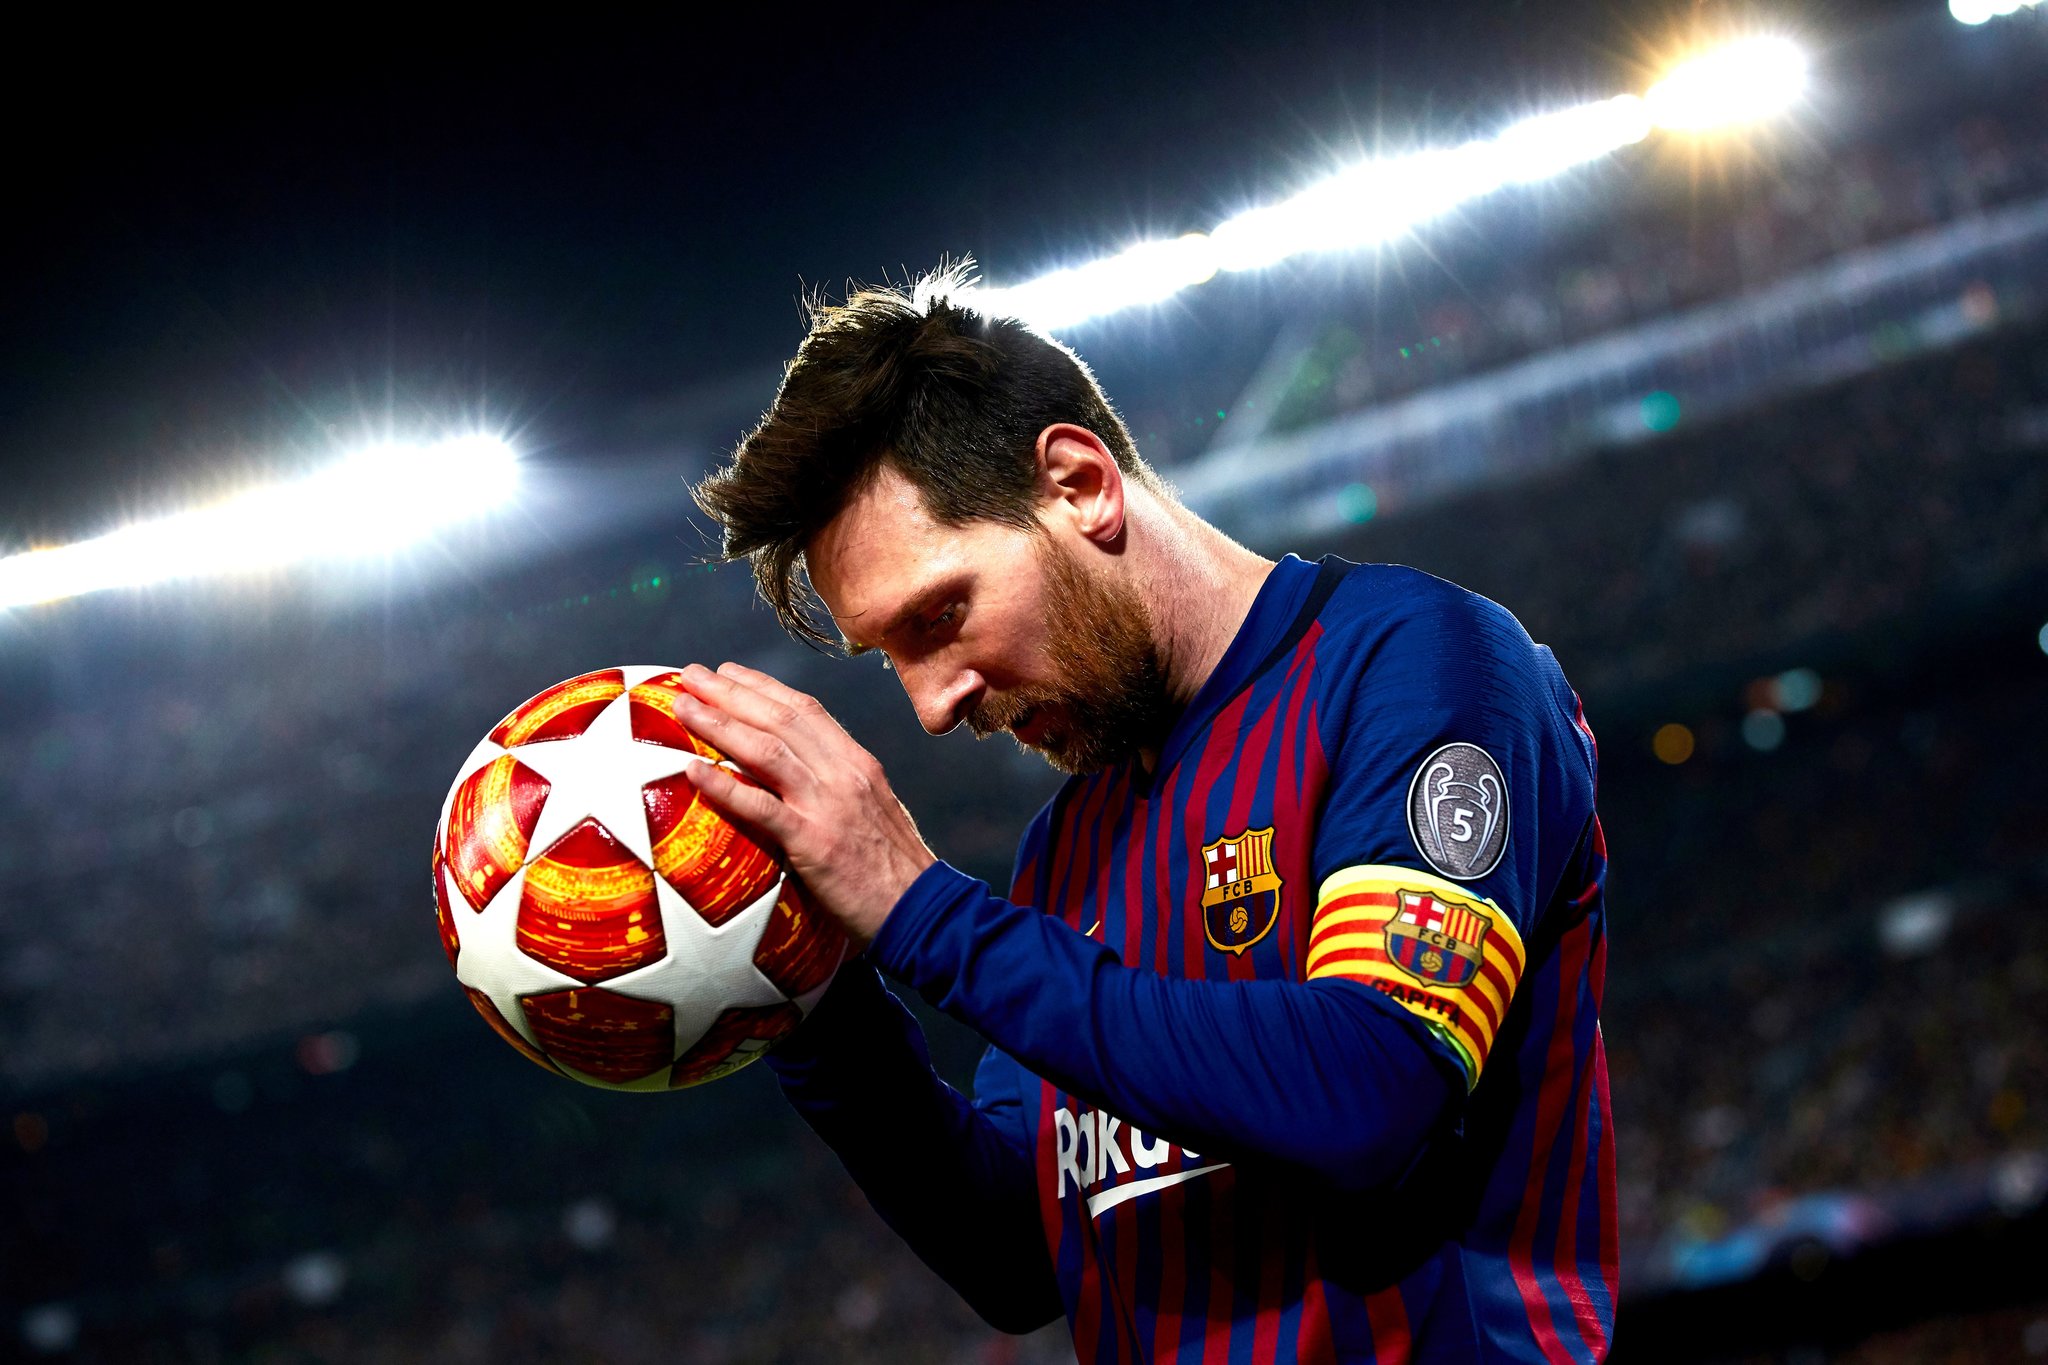 A picture of Lionel Messi